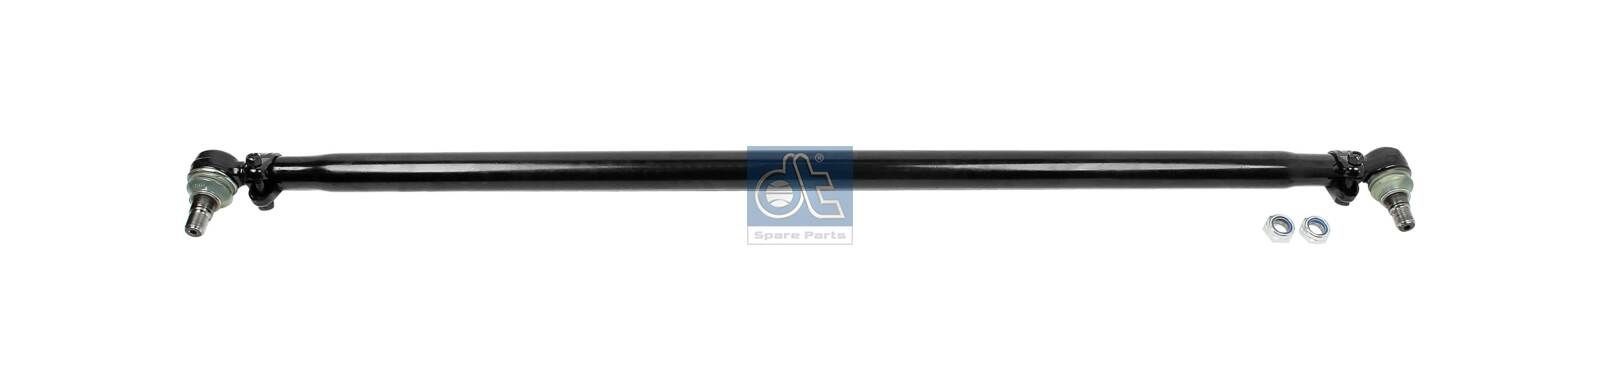 DT Spare Parts 3.63029 Rod Assembly 81.46711.6730